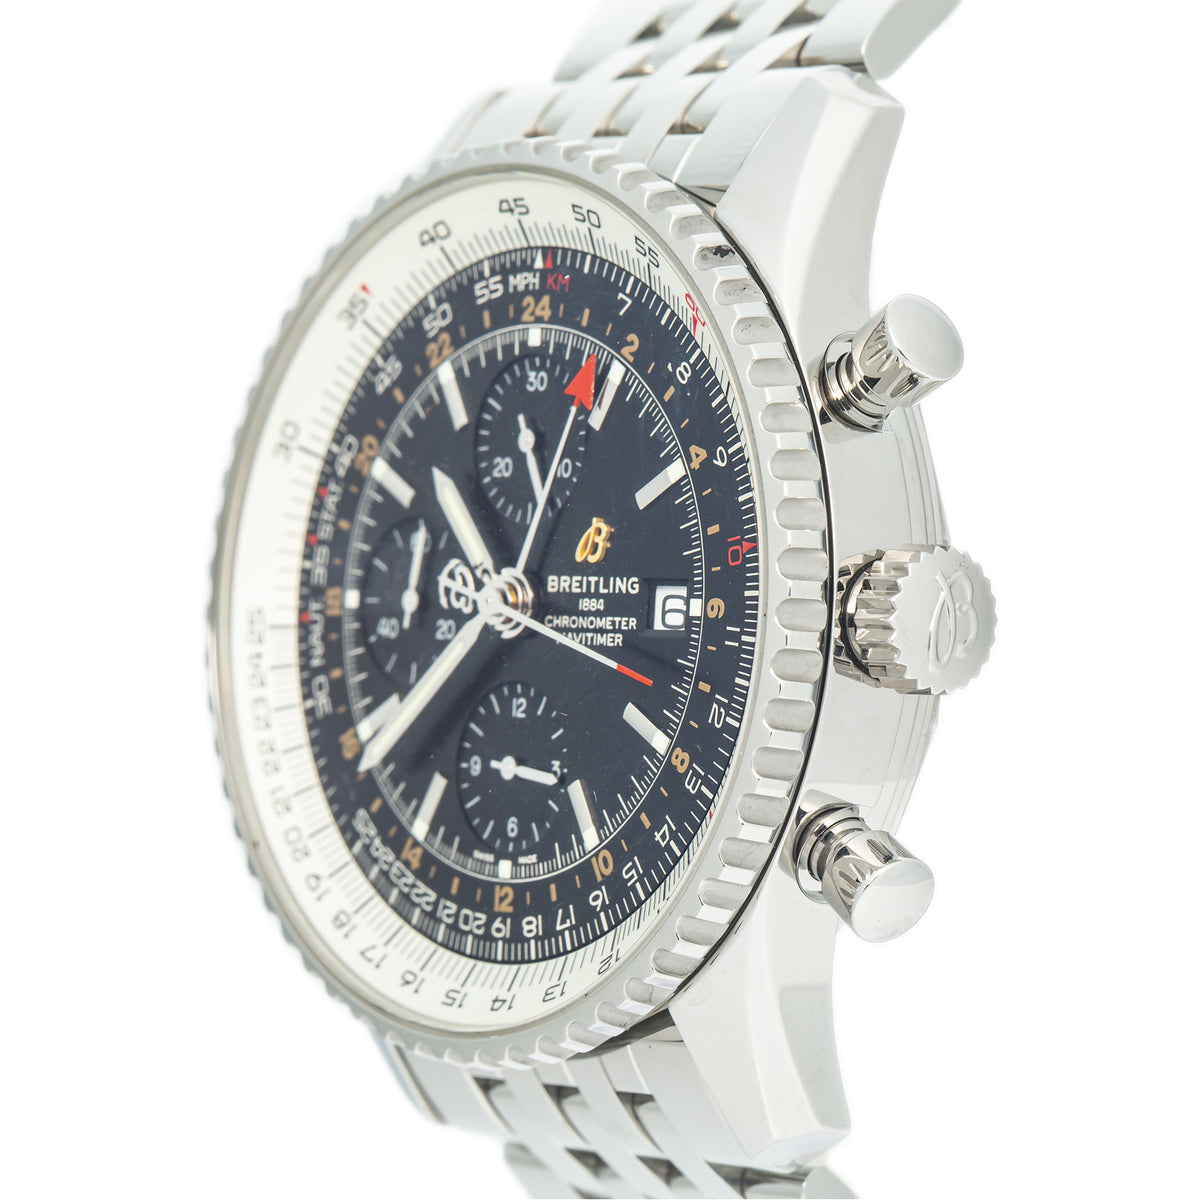 Breitling Navitimer World GMT A24322 Chronograph Black Dial Automatic Watch 46mm